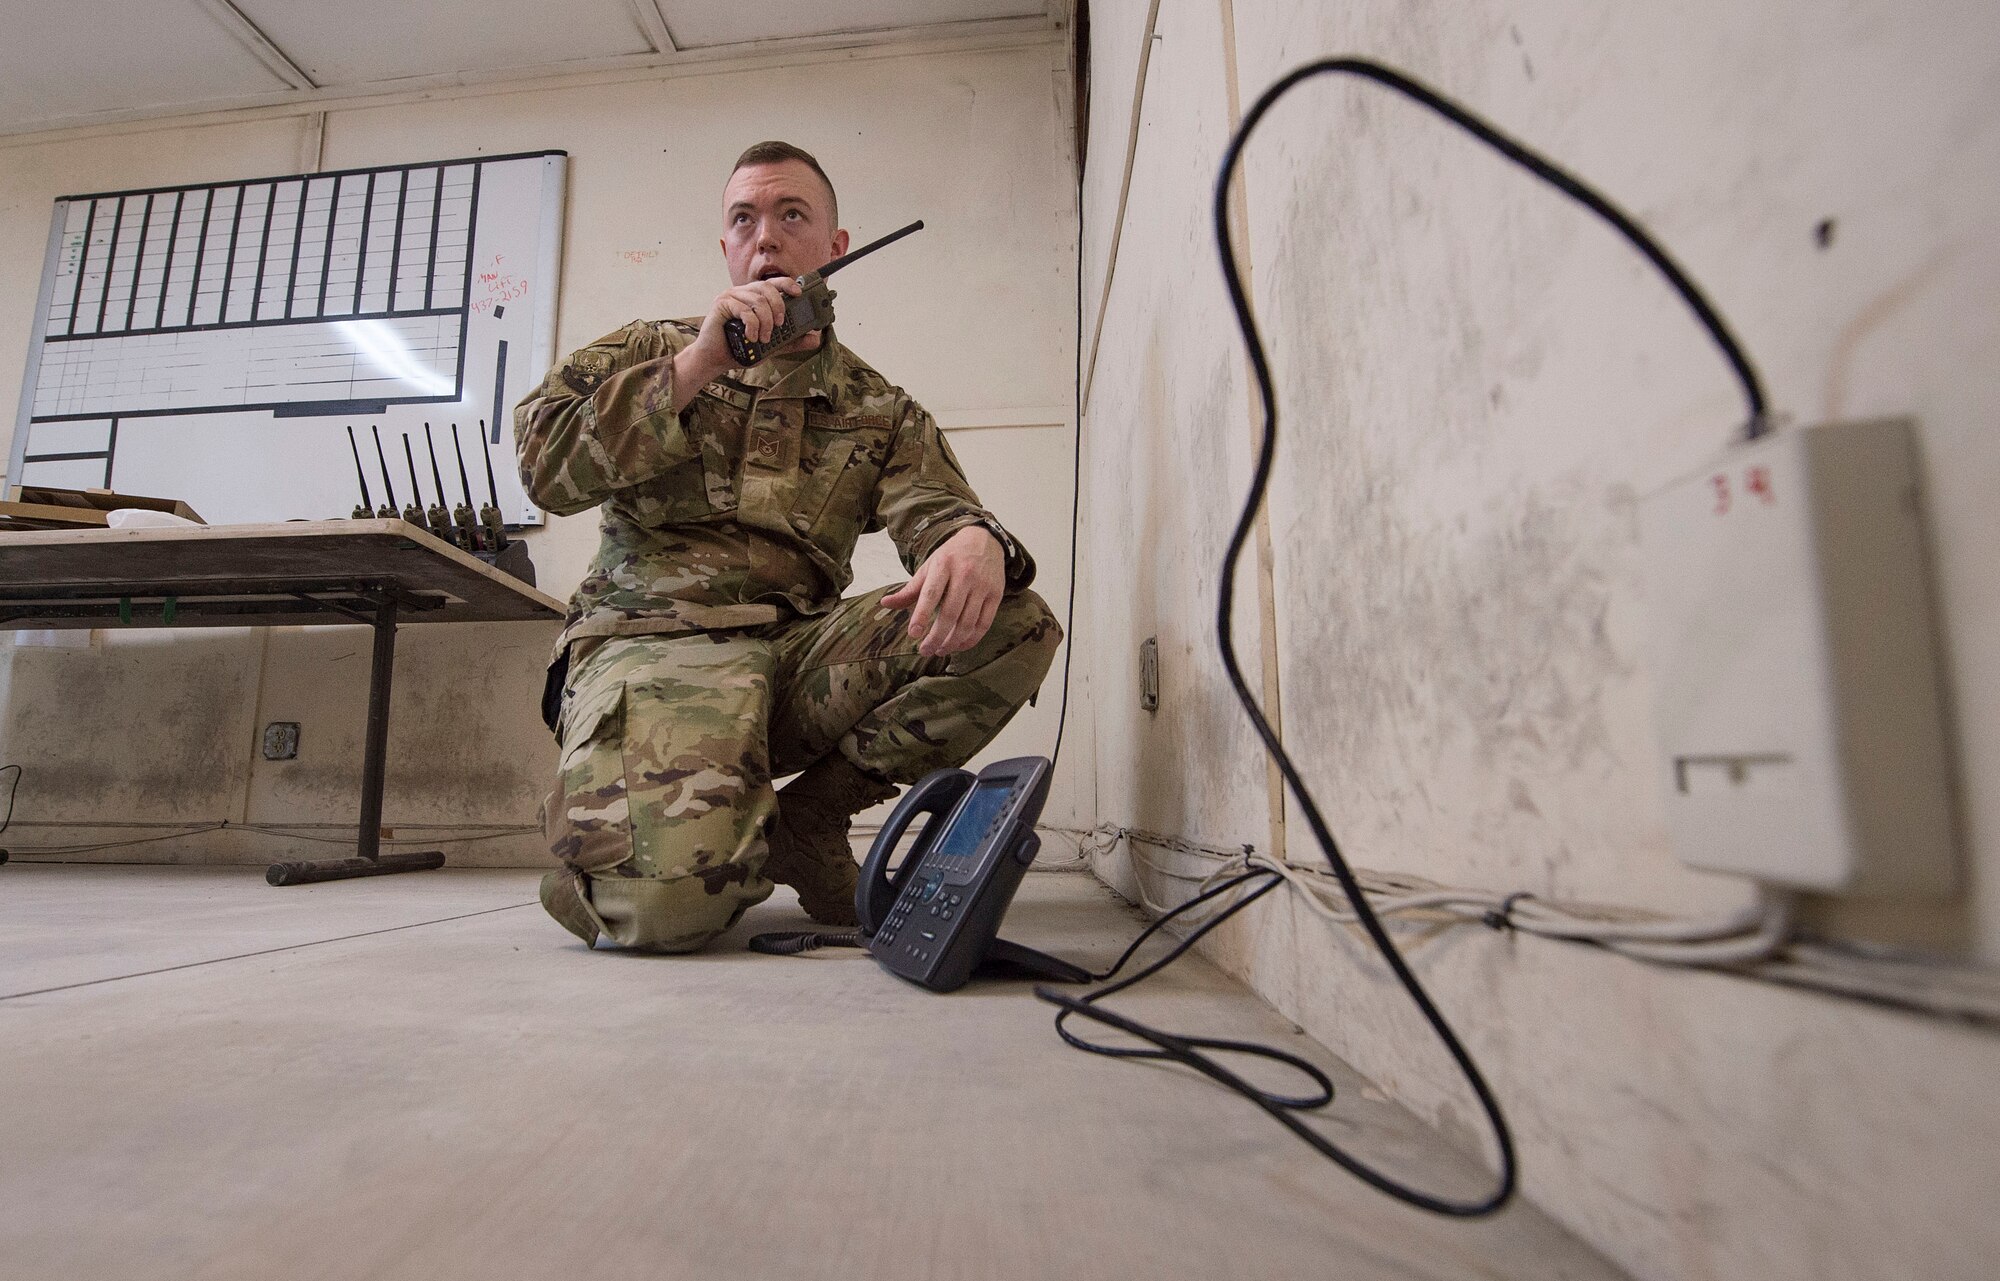 Tech. Sgt. Wesley Sobczyk, 379th Expeditionary Communications Squadron (ECS) cyber transport technician, uses a radio to talk with a coworker while setting up communications infrastructure for a coalition partner facility Feb. 8, 2019, at Al Udeid Air Base, Qatar. Sobczyk is part of a “beddown” team that enables power projection by establishing communications capabilities such as networks, Voice over Internet Protocol telephones, and radios from the ground up (U.S. Air Force photo by Tech. Sgt. Christopher Hubenthal)